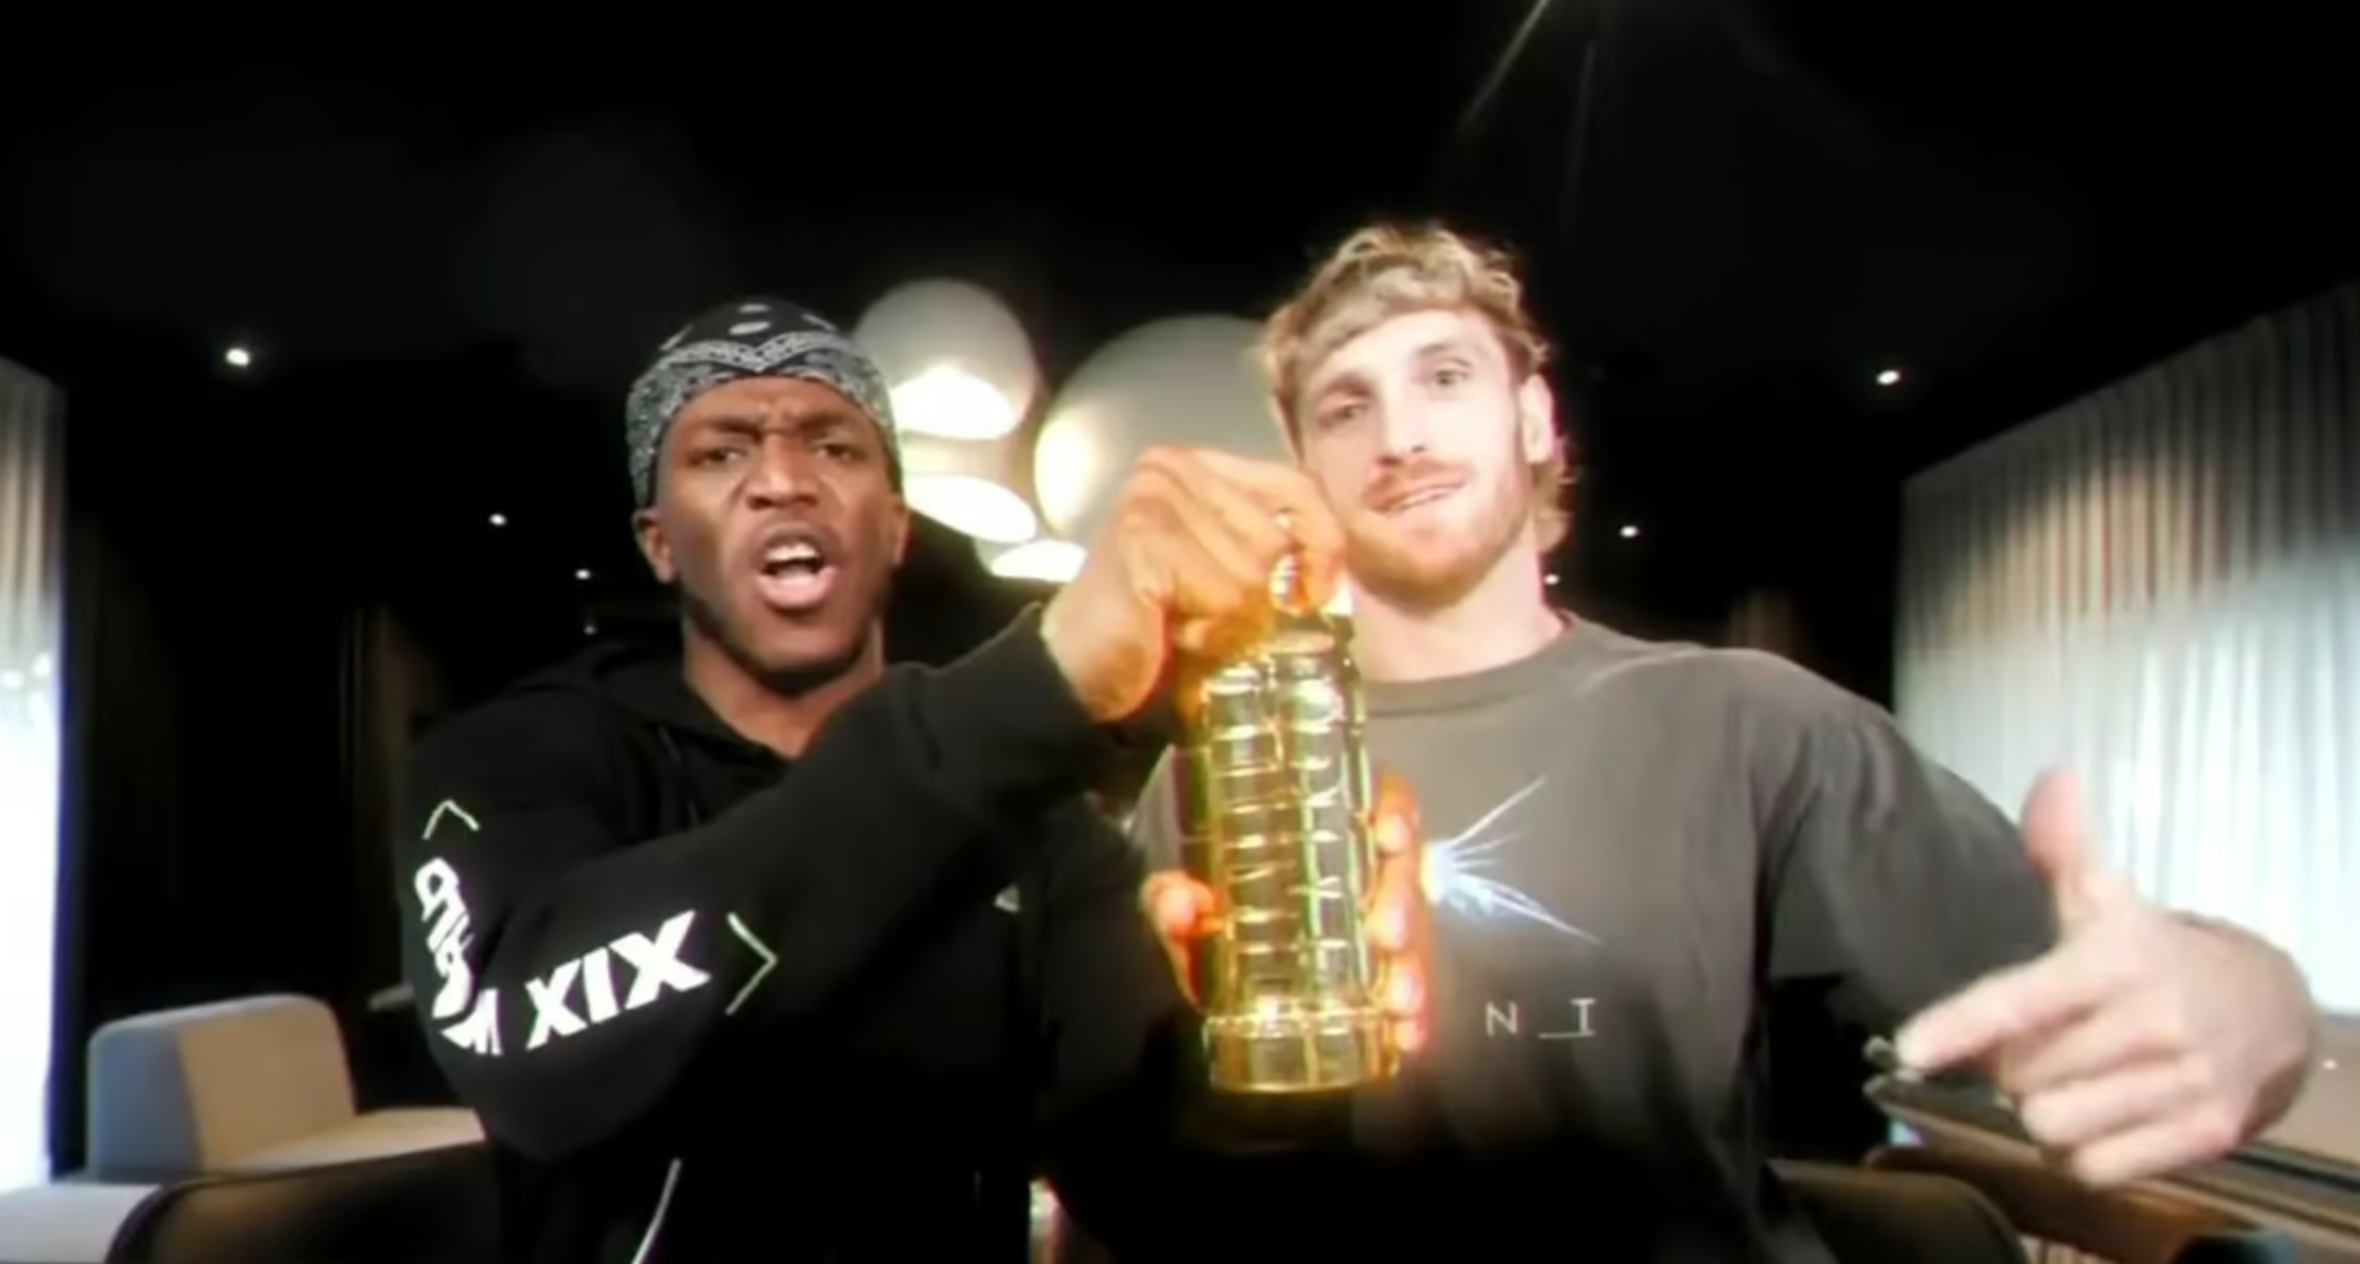 KSI and Logan Paul announce $1,000,000 PRIME Gold Bottle contest in London  and New York